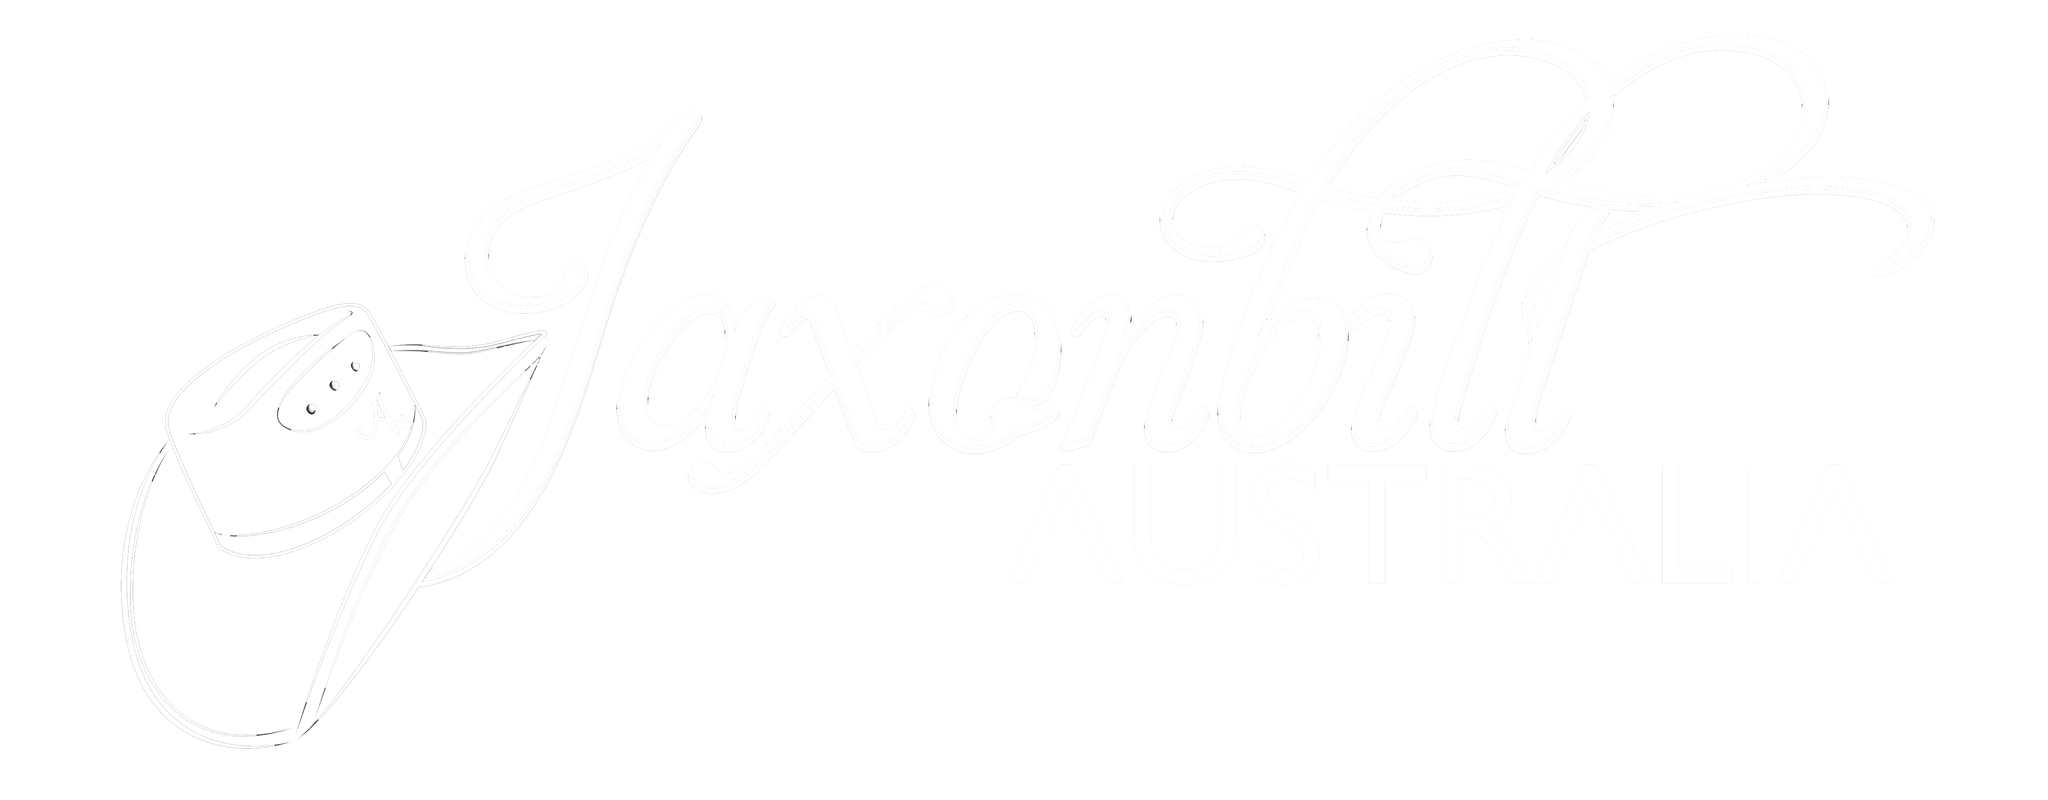 Jaxonbilt_Hats_Australia_offers_a_full_palm_and_crossbred_range_of_customised_hats_for_clients_who_want_individuality.